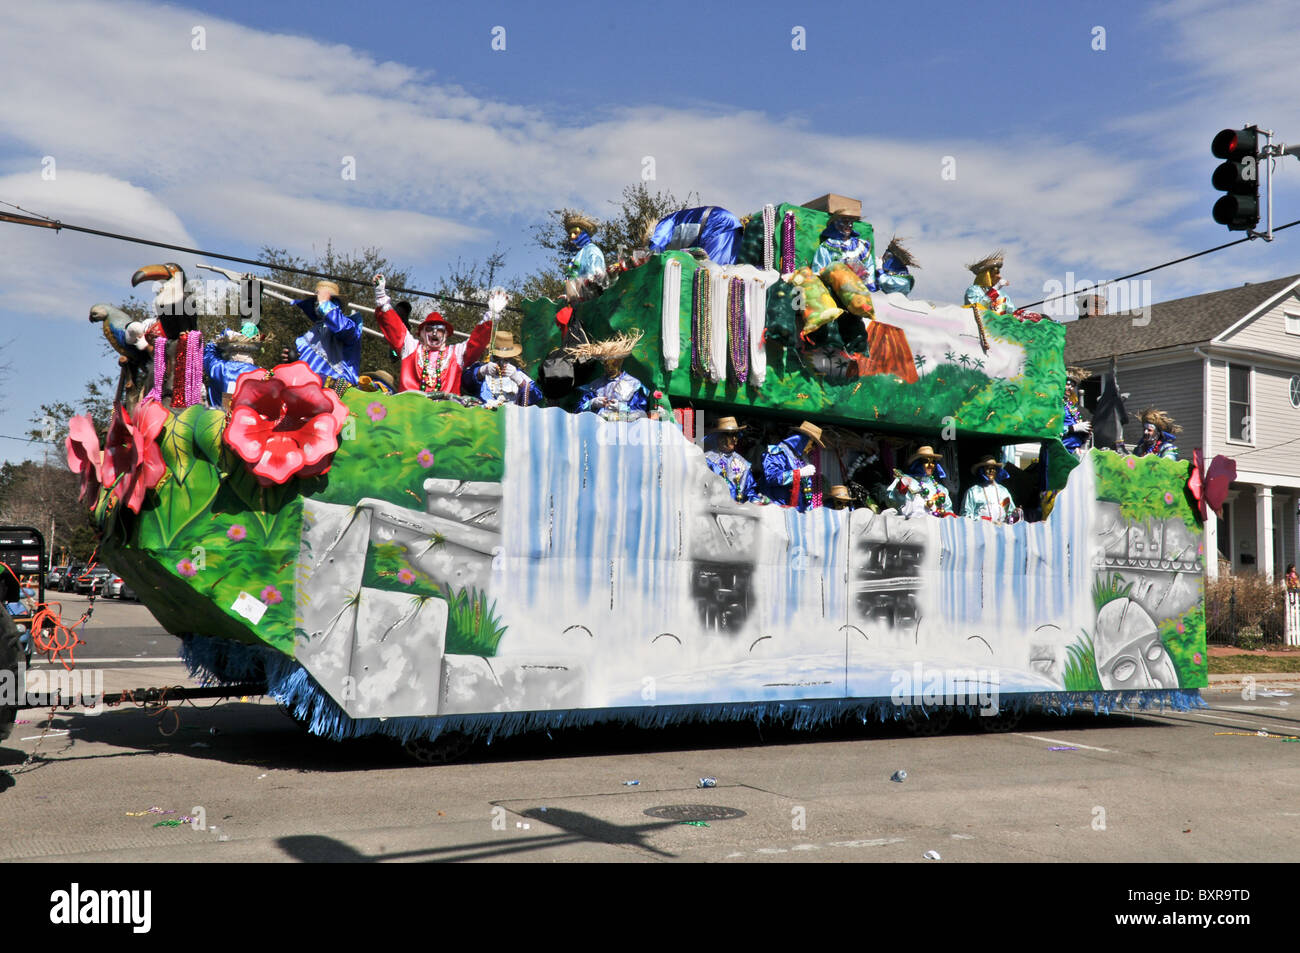 Blue Hawaii' (type of drink) float in Krewe of Thoth parade, Mardi Gras 2010, New Orleans, Louisiana Stock Photo